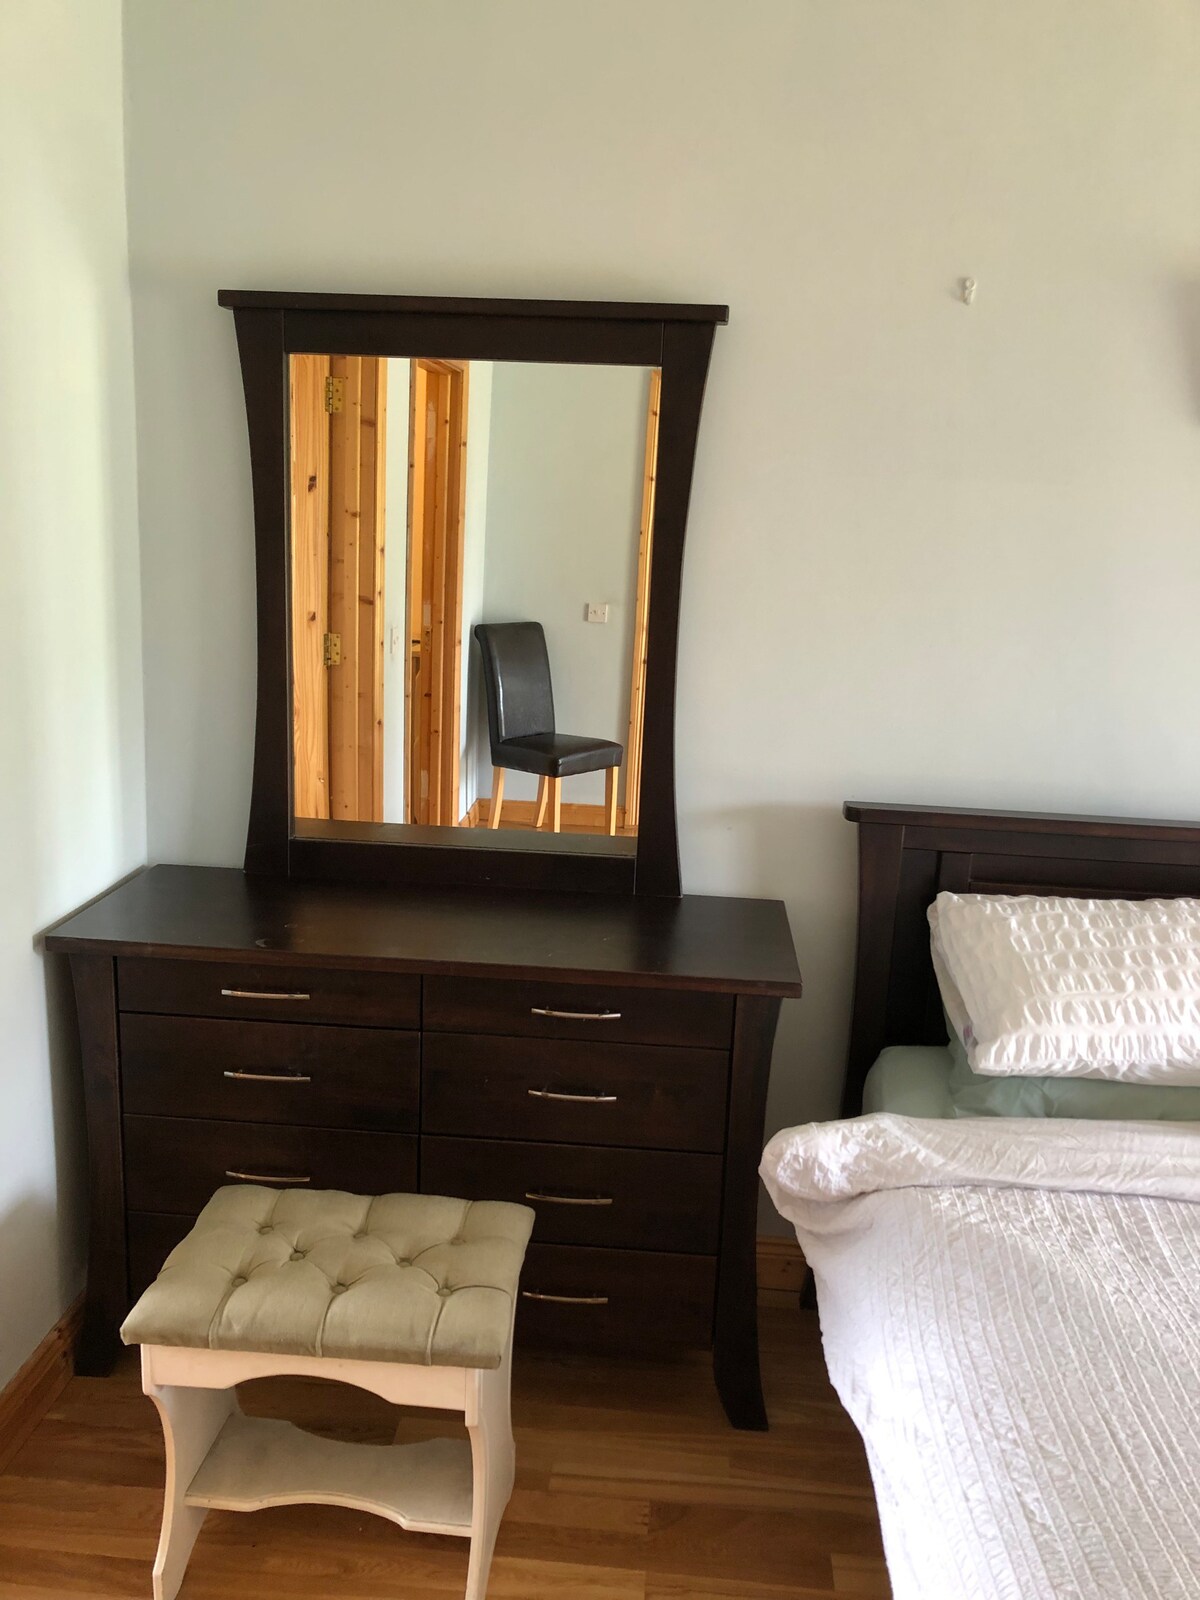 Self contained guest suite with parking